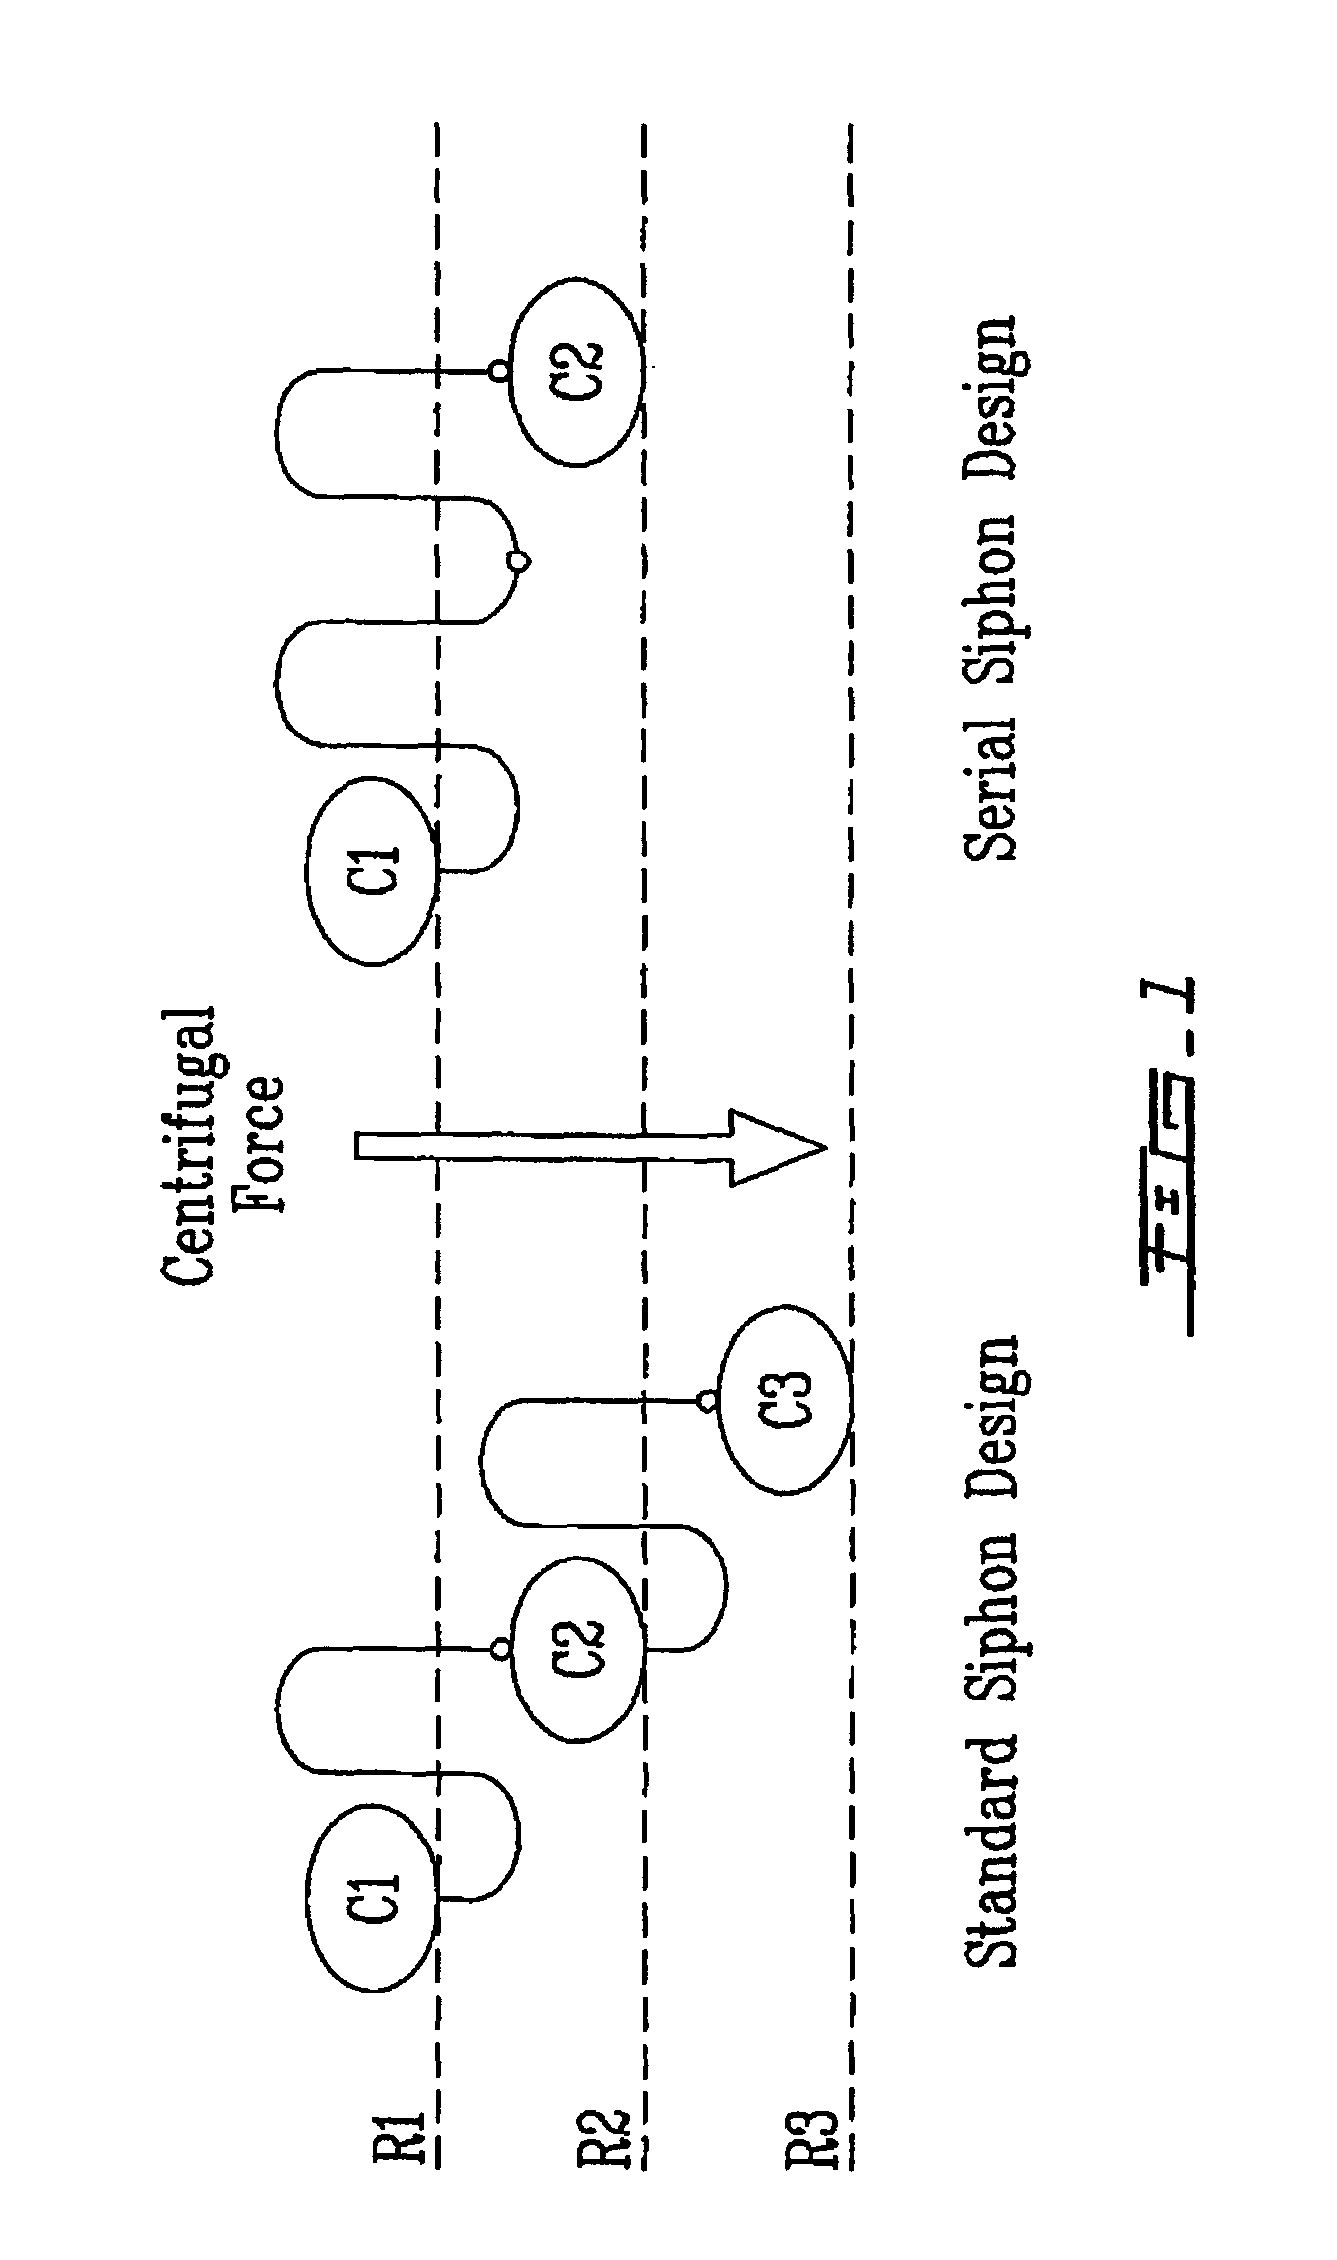 Serial siphon valves for fluidic or microfluidic devices